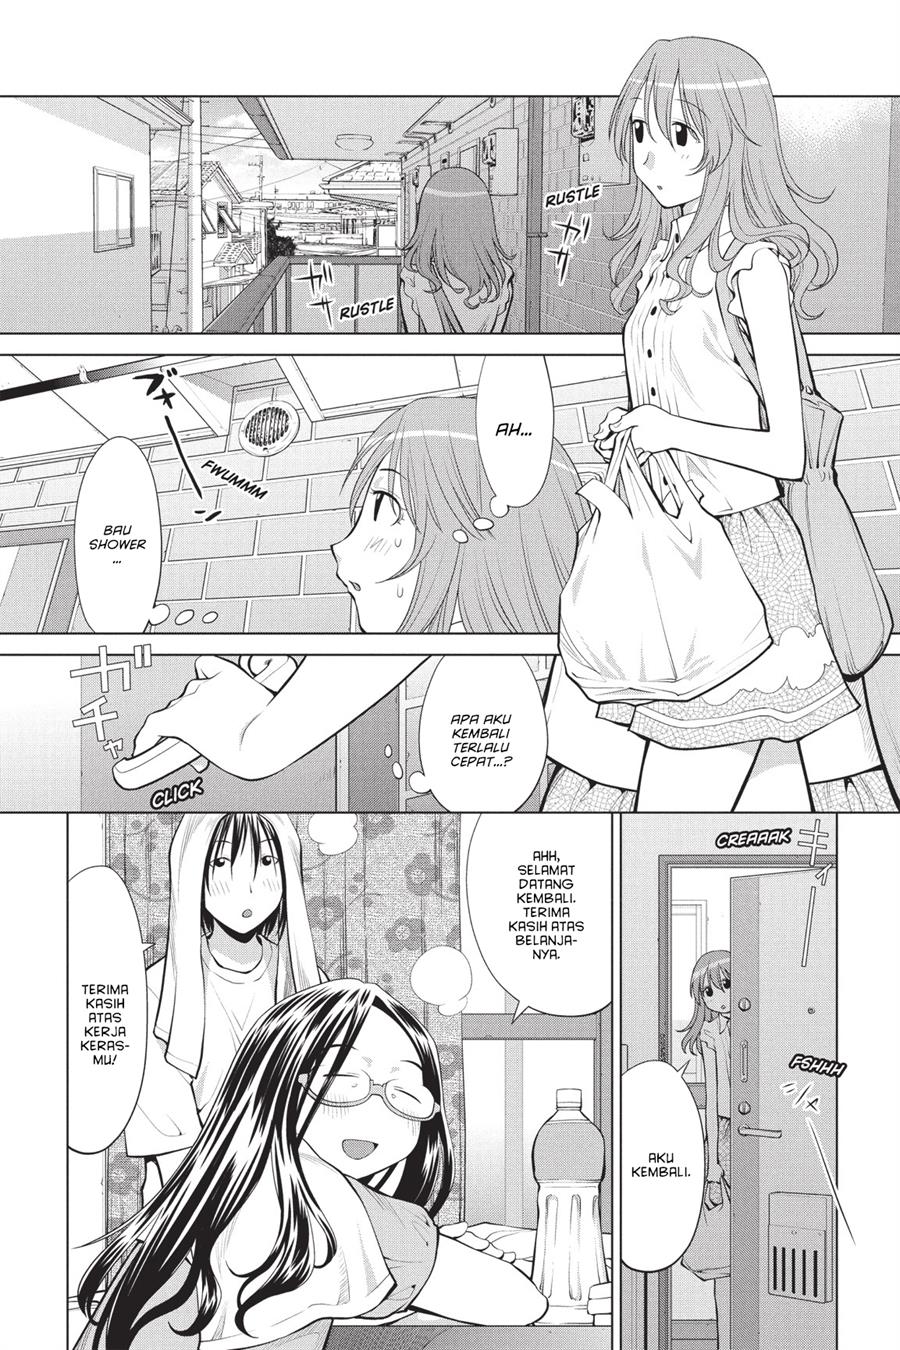 Genshiken – The Society for the Study of Modern Visual Culture Chapter 69 Image 3